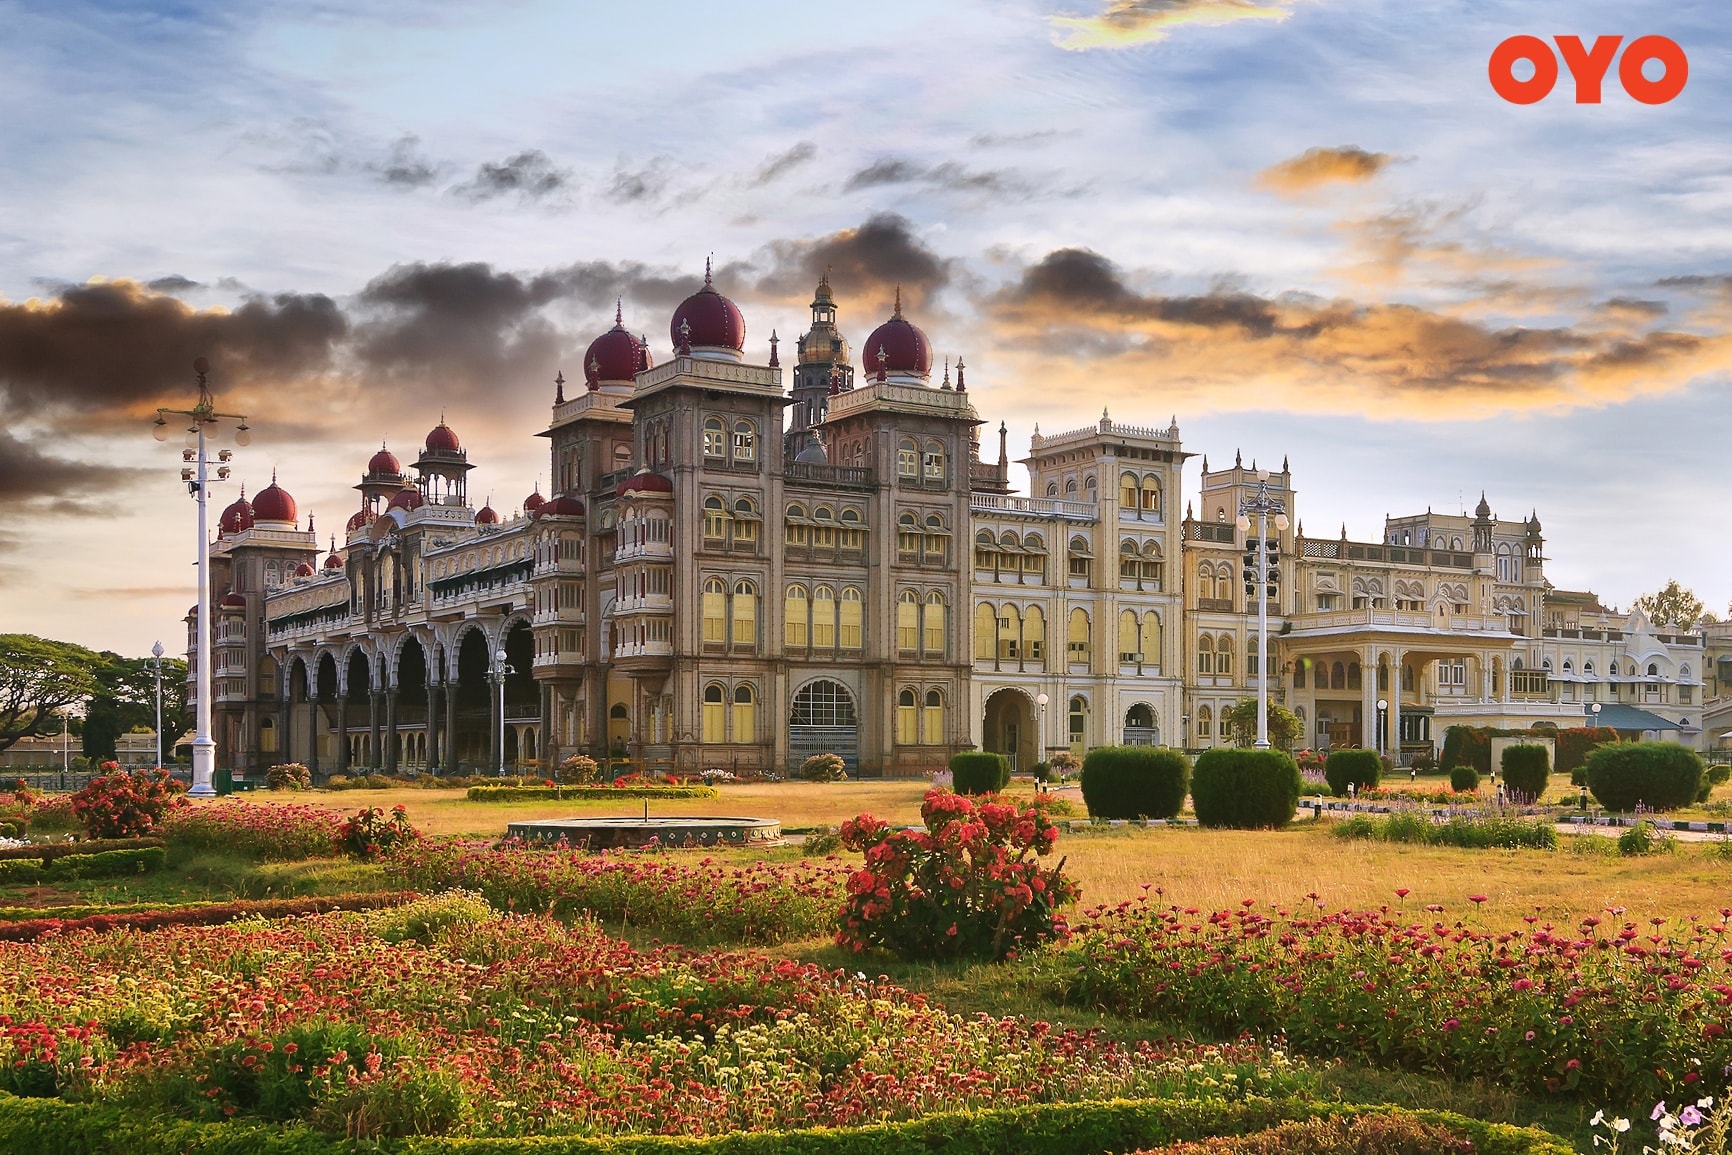 Mysore Palace, Mysore -one of the most famous historical monuments in India